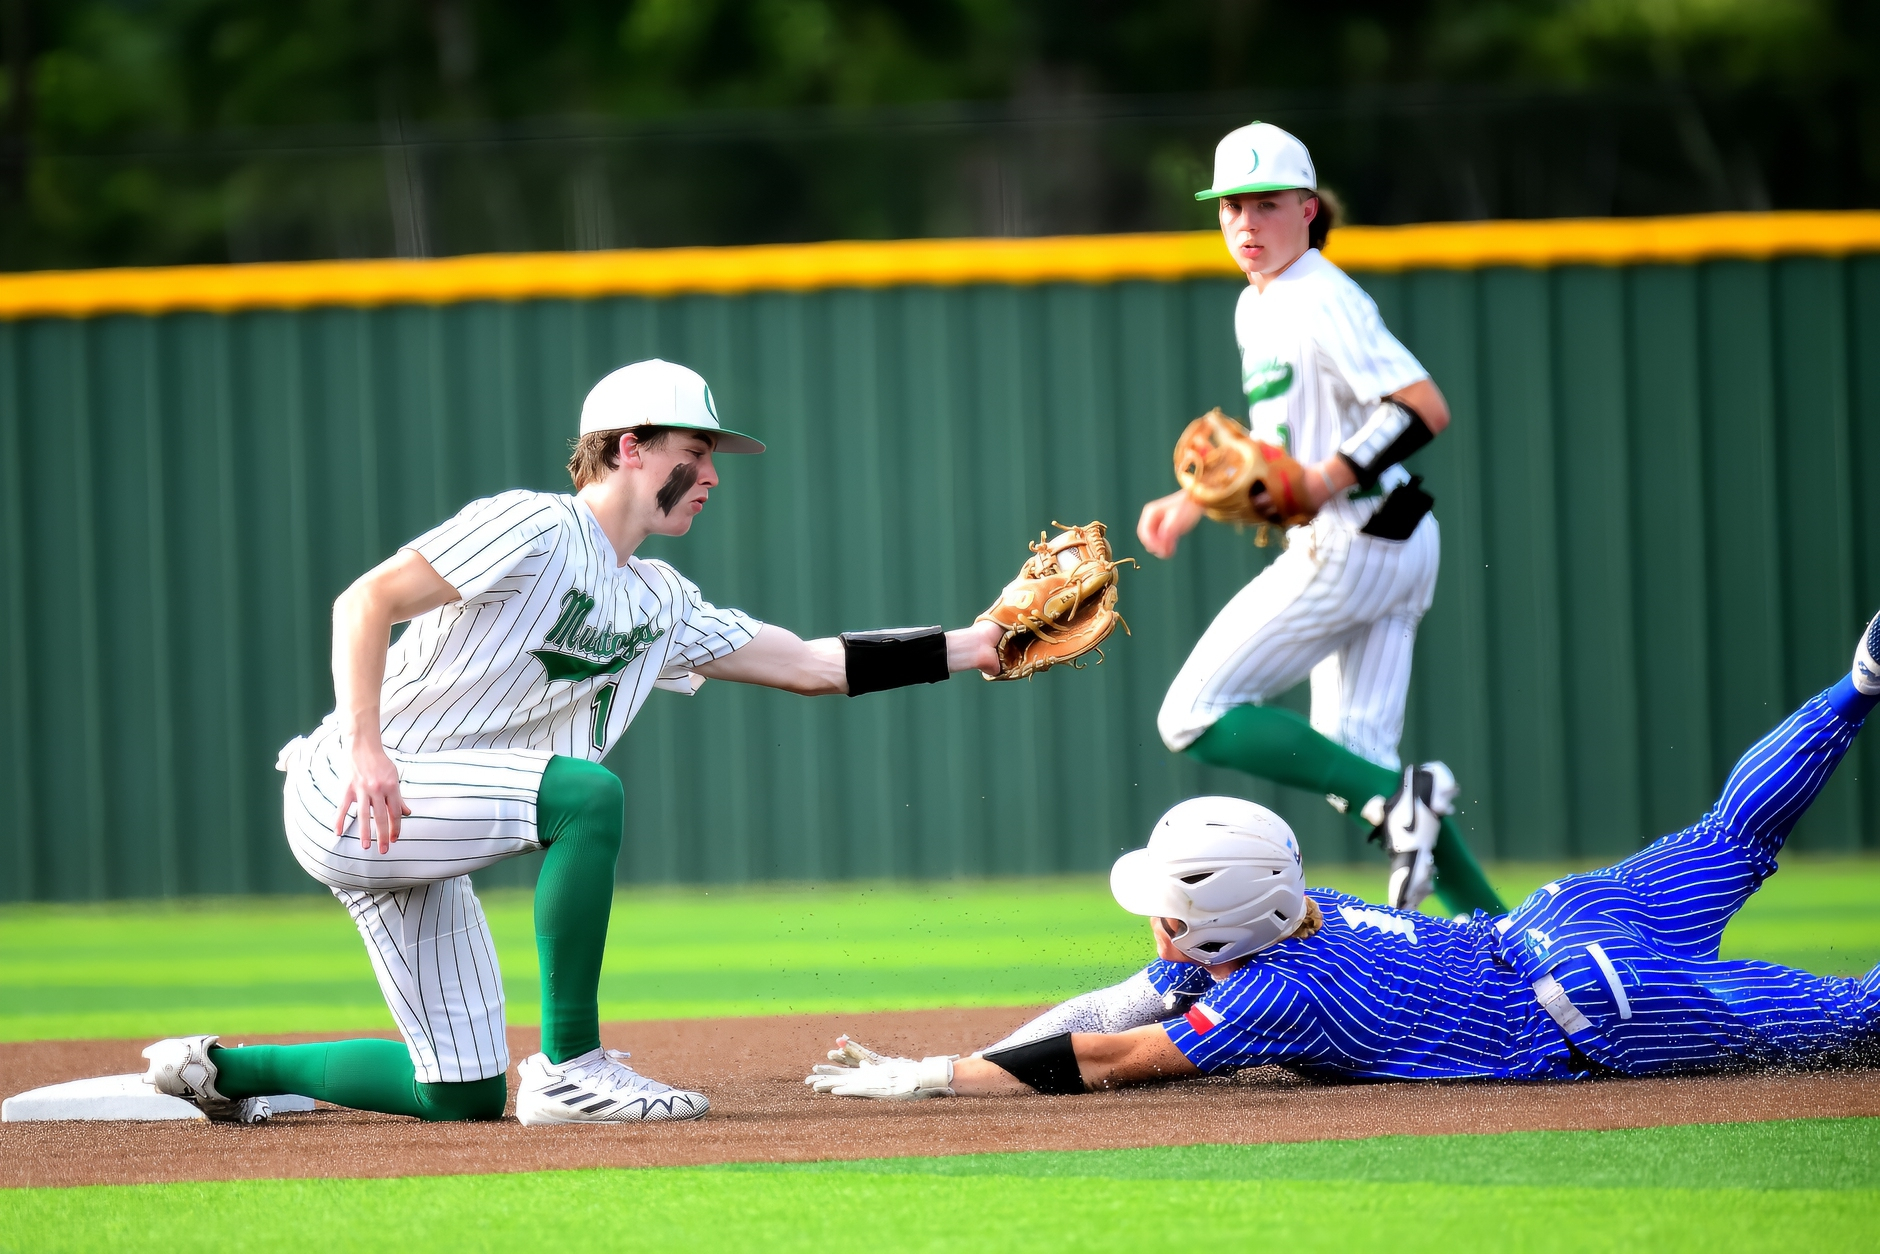 Overton's Mason Rowe attempts to make a tag on a pick-off play against Frankston. The University Interscholastic League made a dynamic change to most team sports besides football on Tuesday. The UIL's legislative council voted to add divisions for each classification, meaning a "big" division and a "small" division for each sport, Division I and Division II. In other words, like football, there will be a Division I baseball champion for 3A and a Division II baseball champ for 3A. And this will take effect immediately, beginning in the upcoming school year. (Photo by RONNIE SARTORS - SPORT SHOT PHOTOGRAPHY - ETBLITZ.COM)